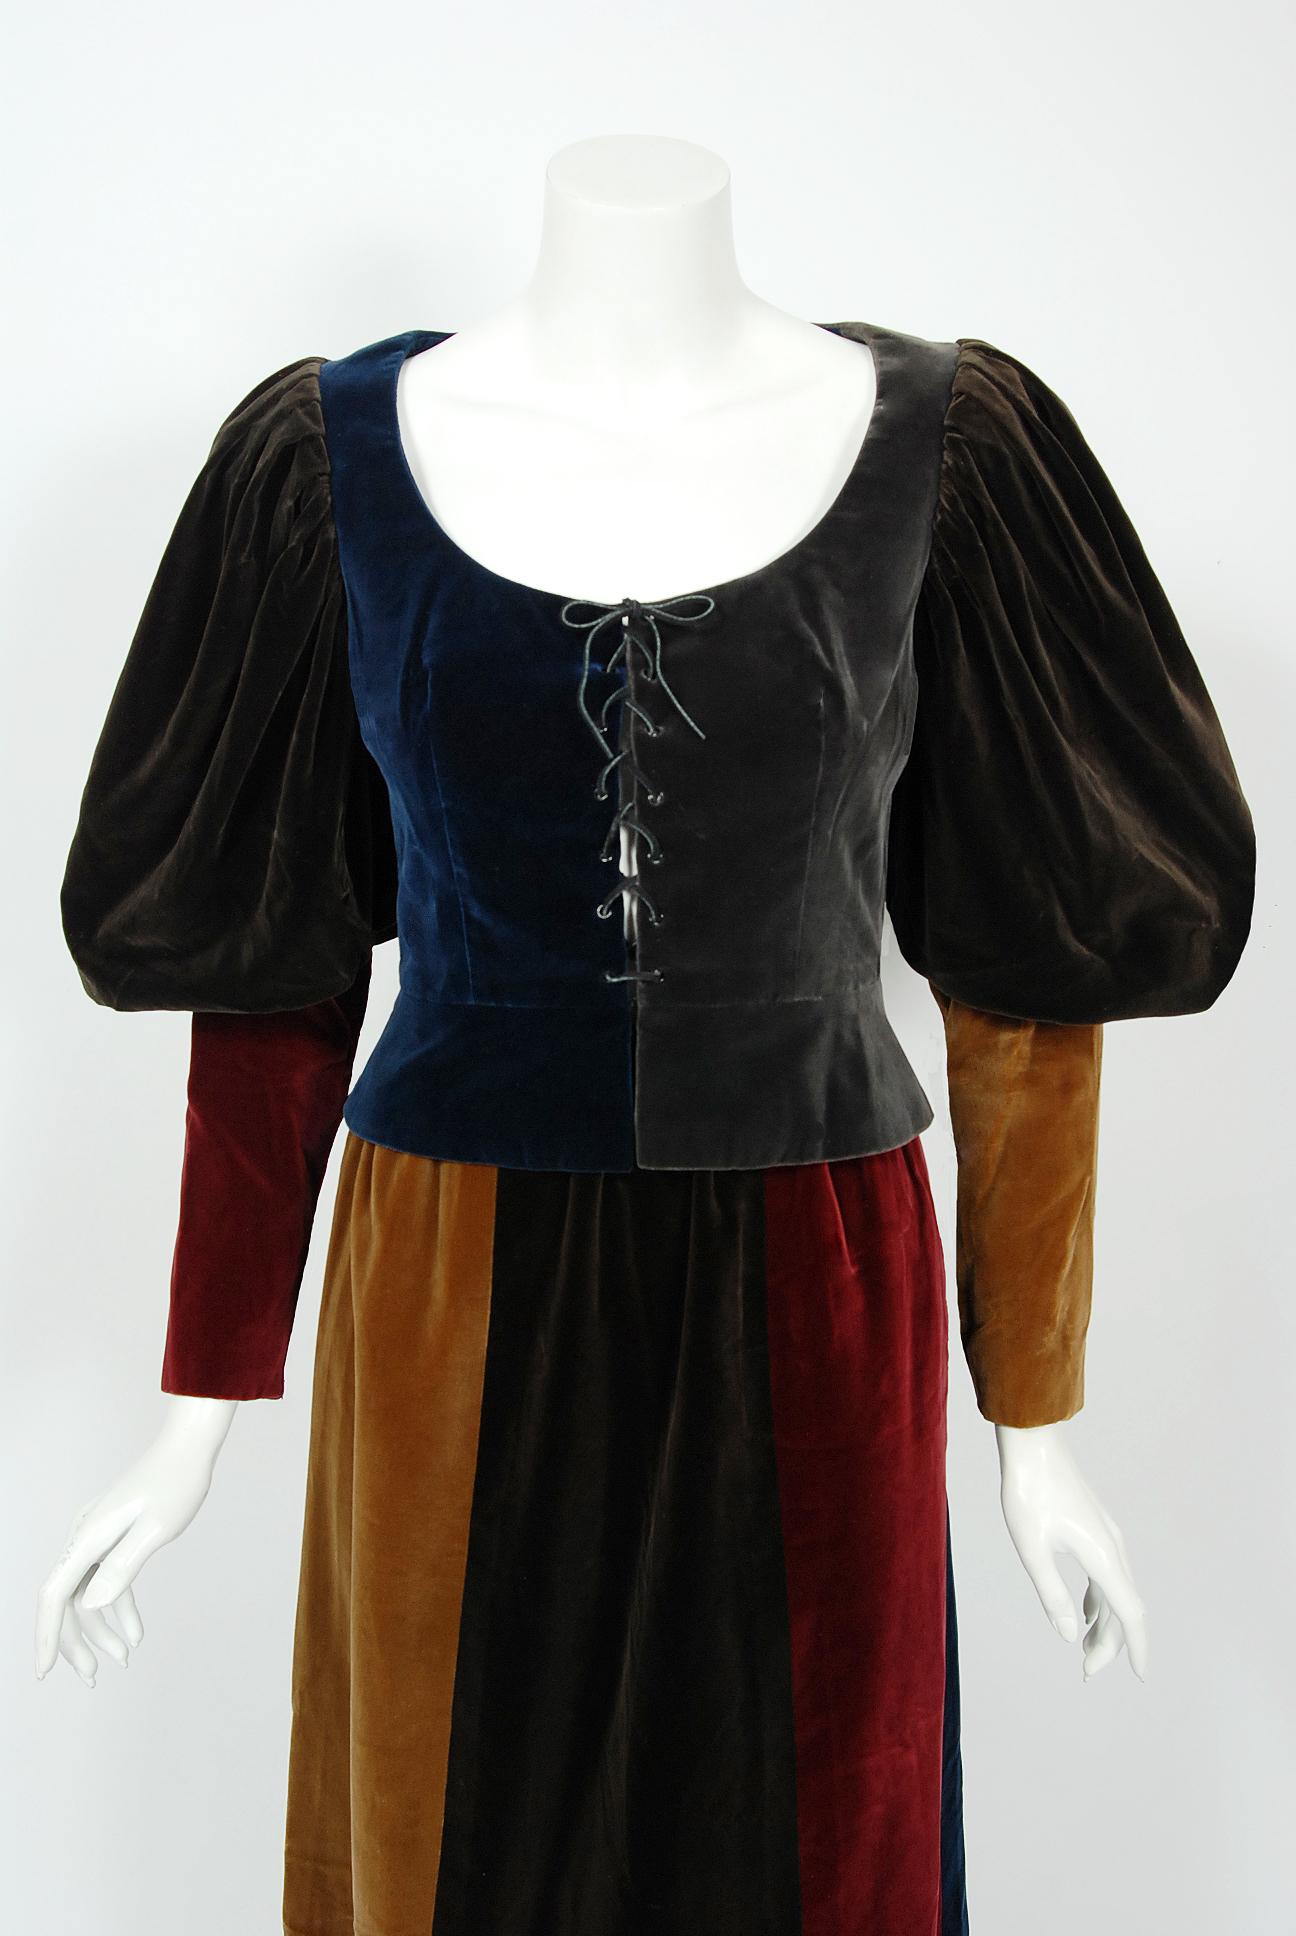 Gorgeous Yves Saint Laurent block color velveteen Renaissance style ensemble from the infamous 1970 Rive Gauche collection. Pieces from this decade are very rare and are true examples of fashion history. Some of Yves Saint Laurent's most dramatic